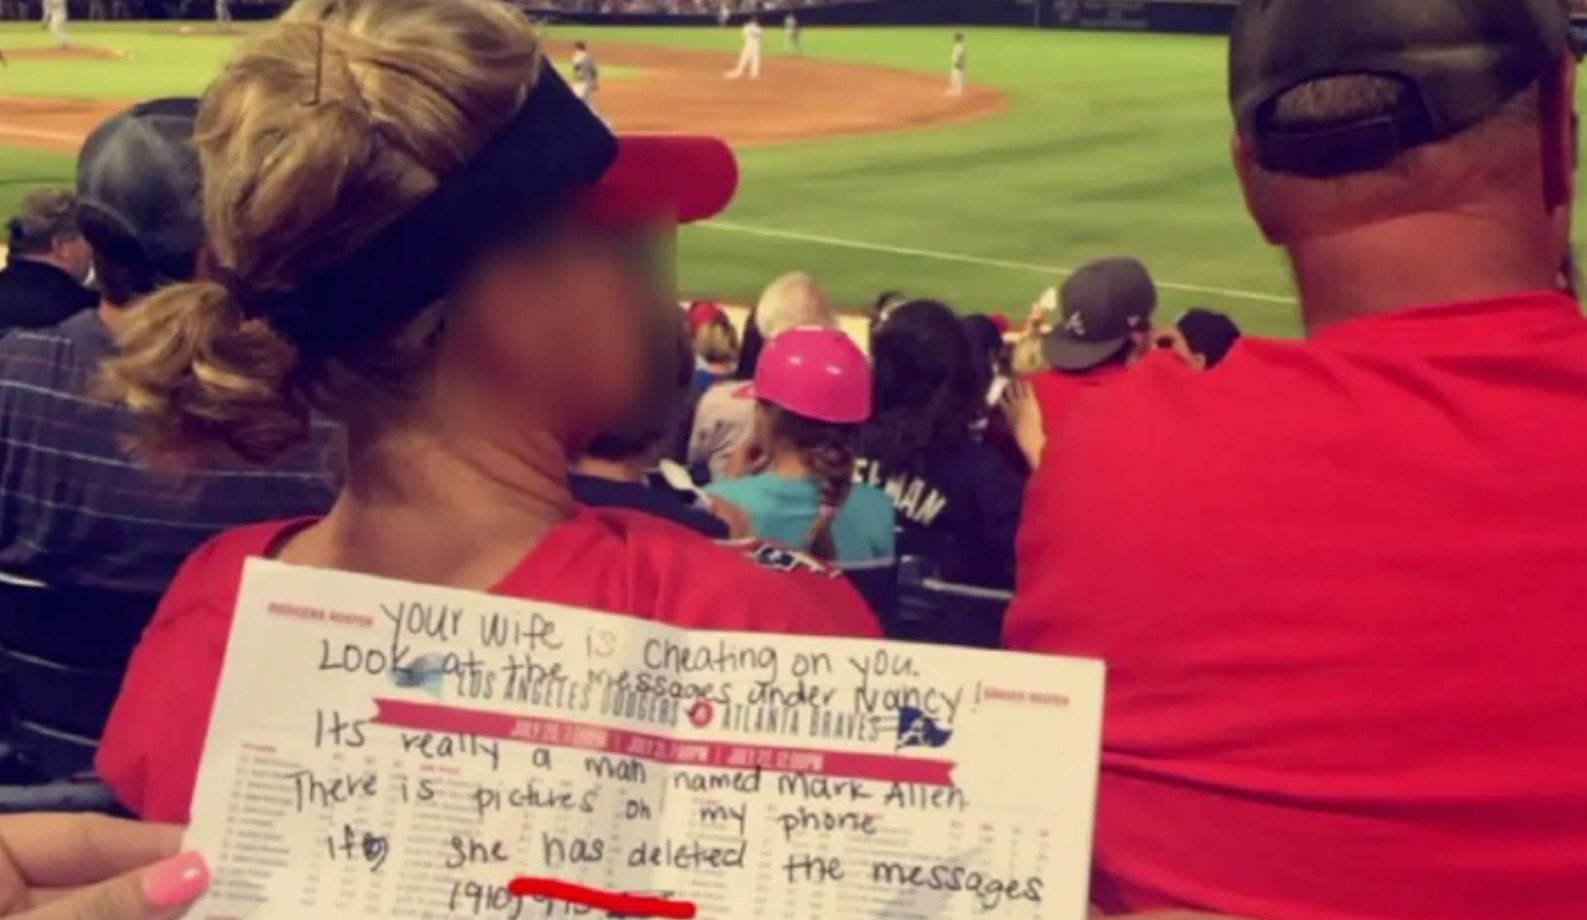 Cheating Wife Reportedly Busted While Sexting At A Baseball Game HuffPost Sports photo